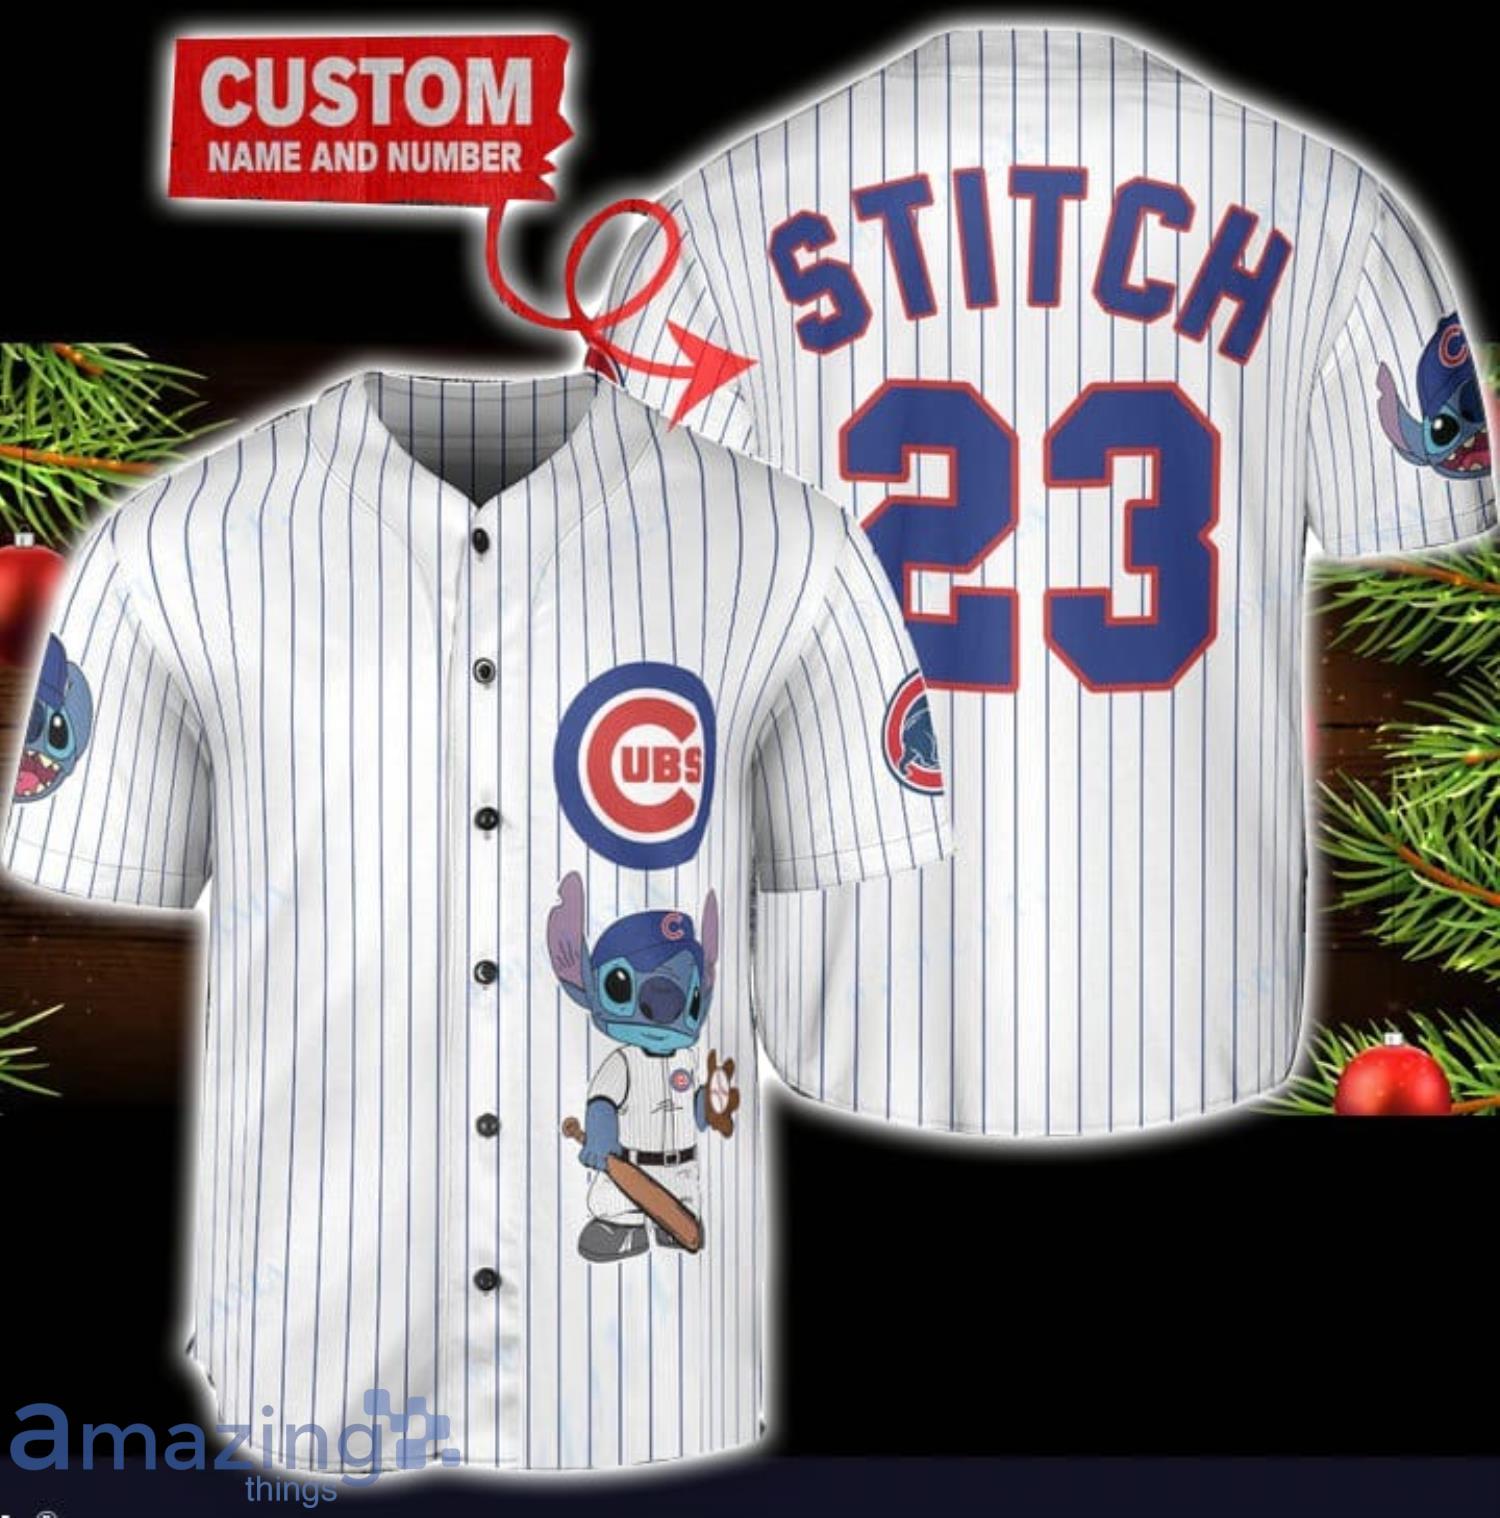 Personalized MLB Chicago Cubs team custom name and number shirt